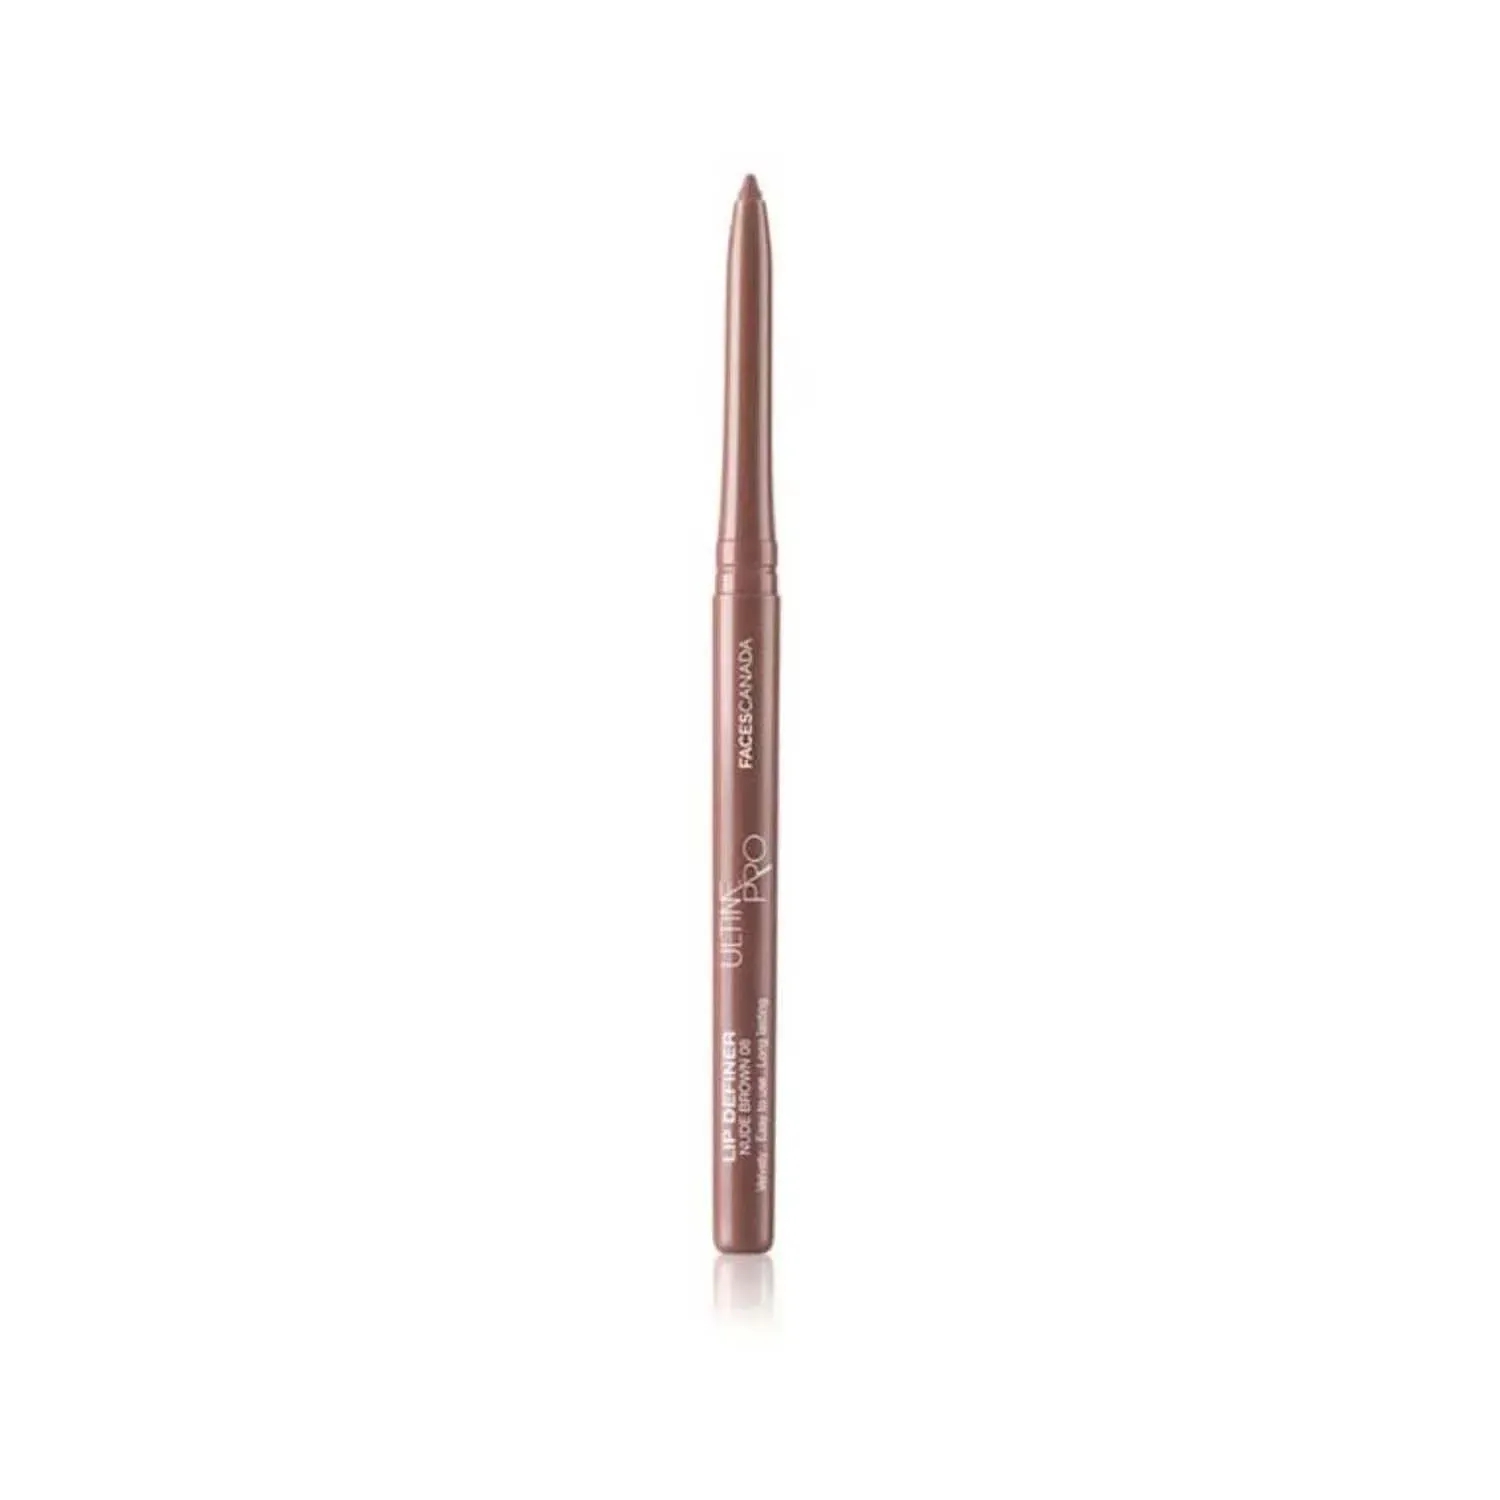 Faces Canada Ultime Pro Lip Definer - 08 Nude Brown (0.35g)